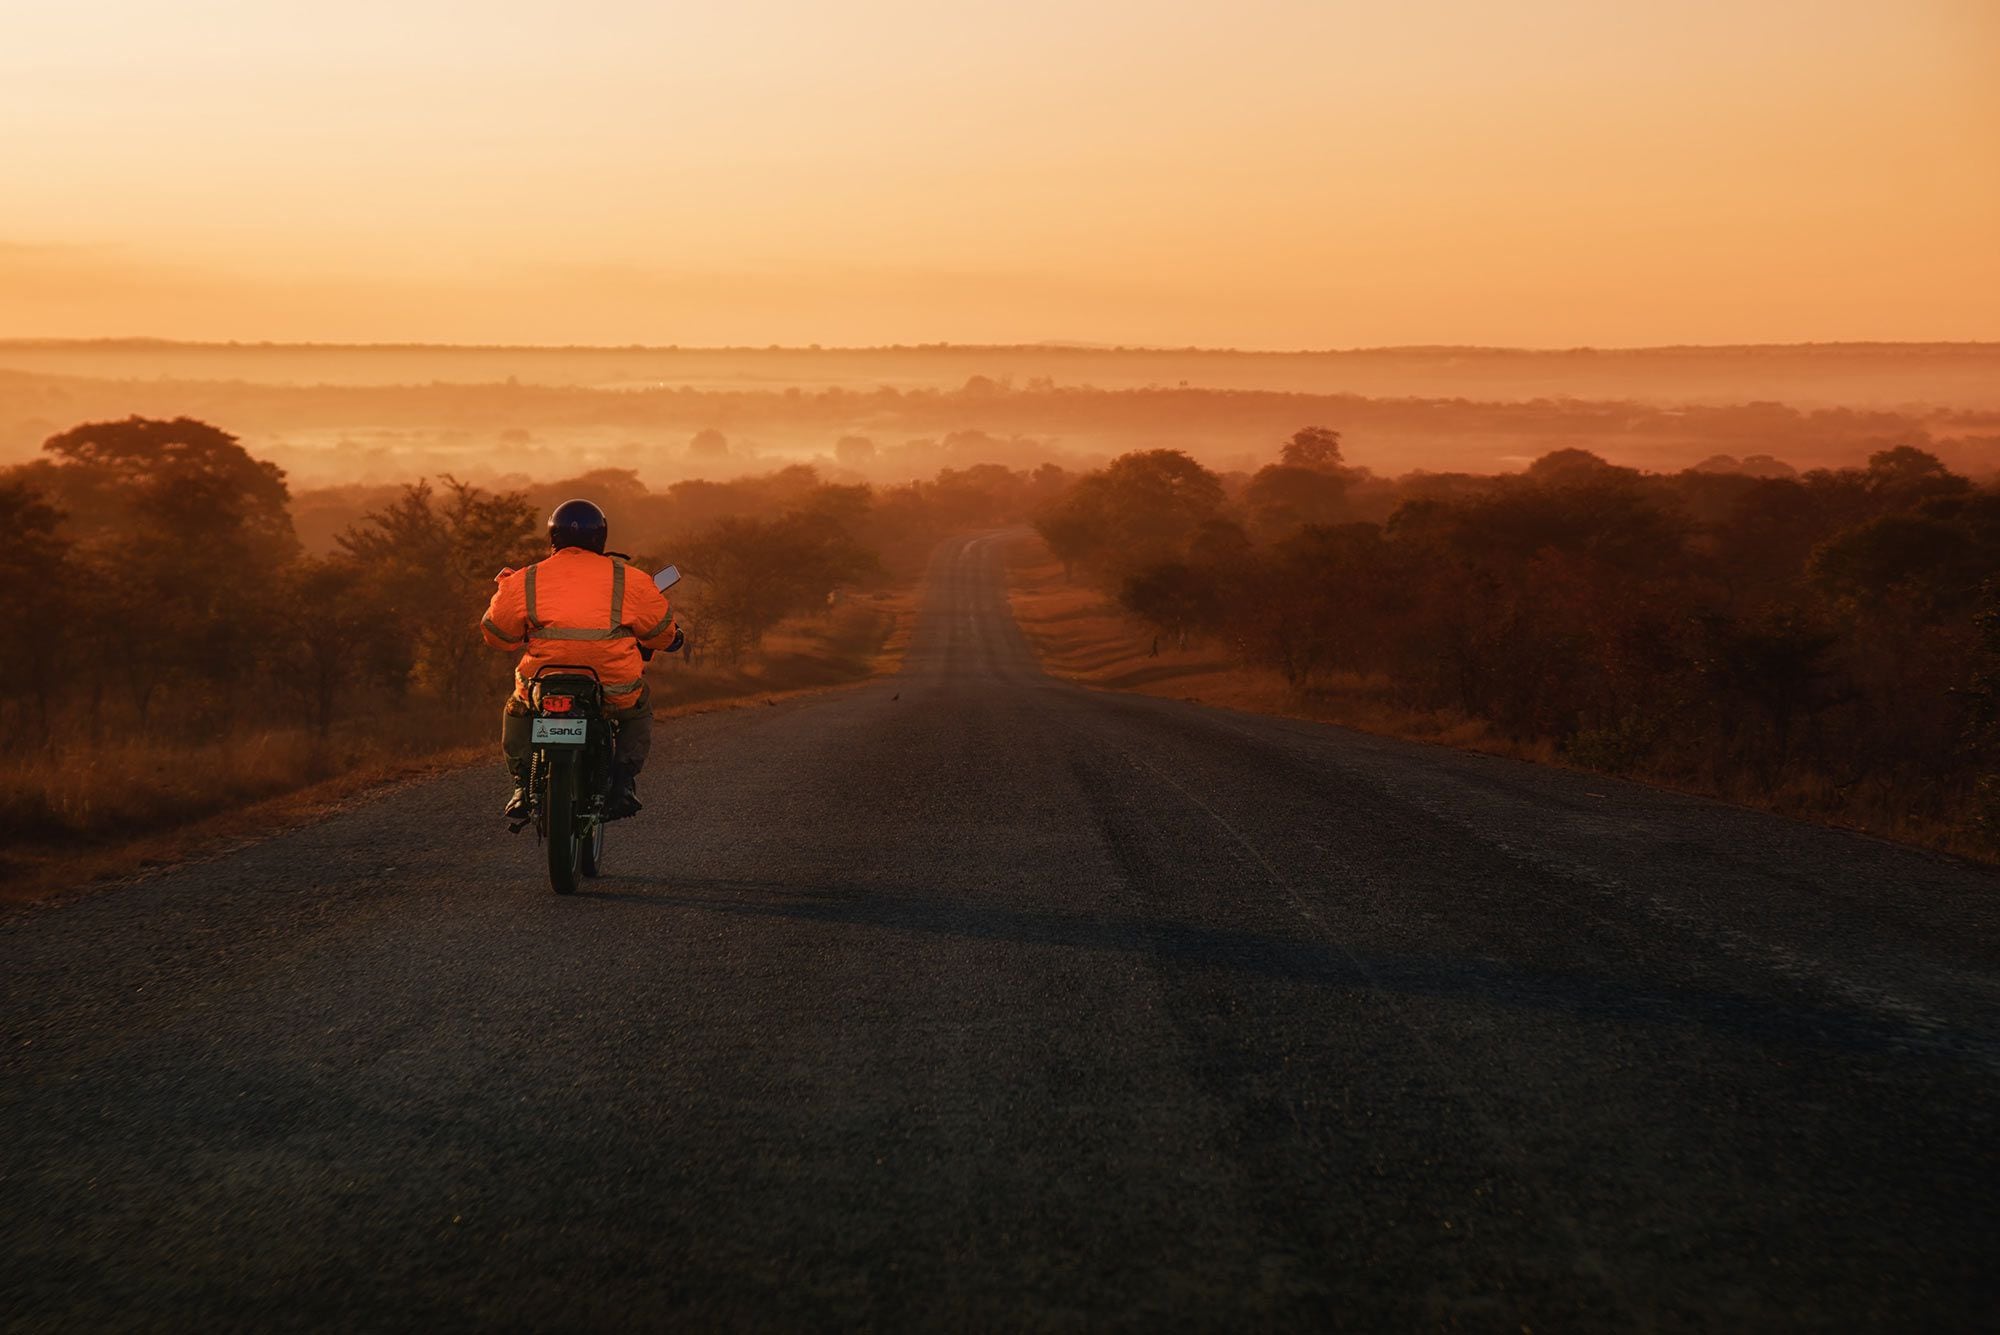 Lonely roads are meant for kindred souls: the right road trip can change everything.